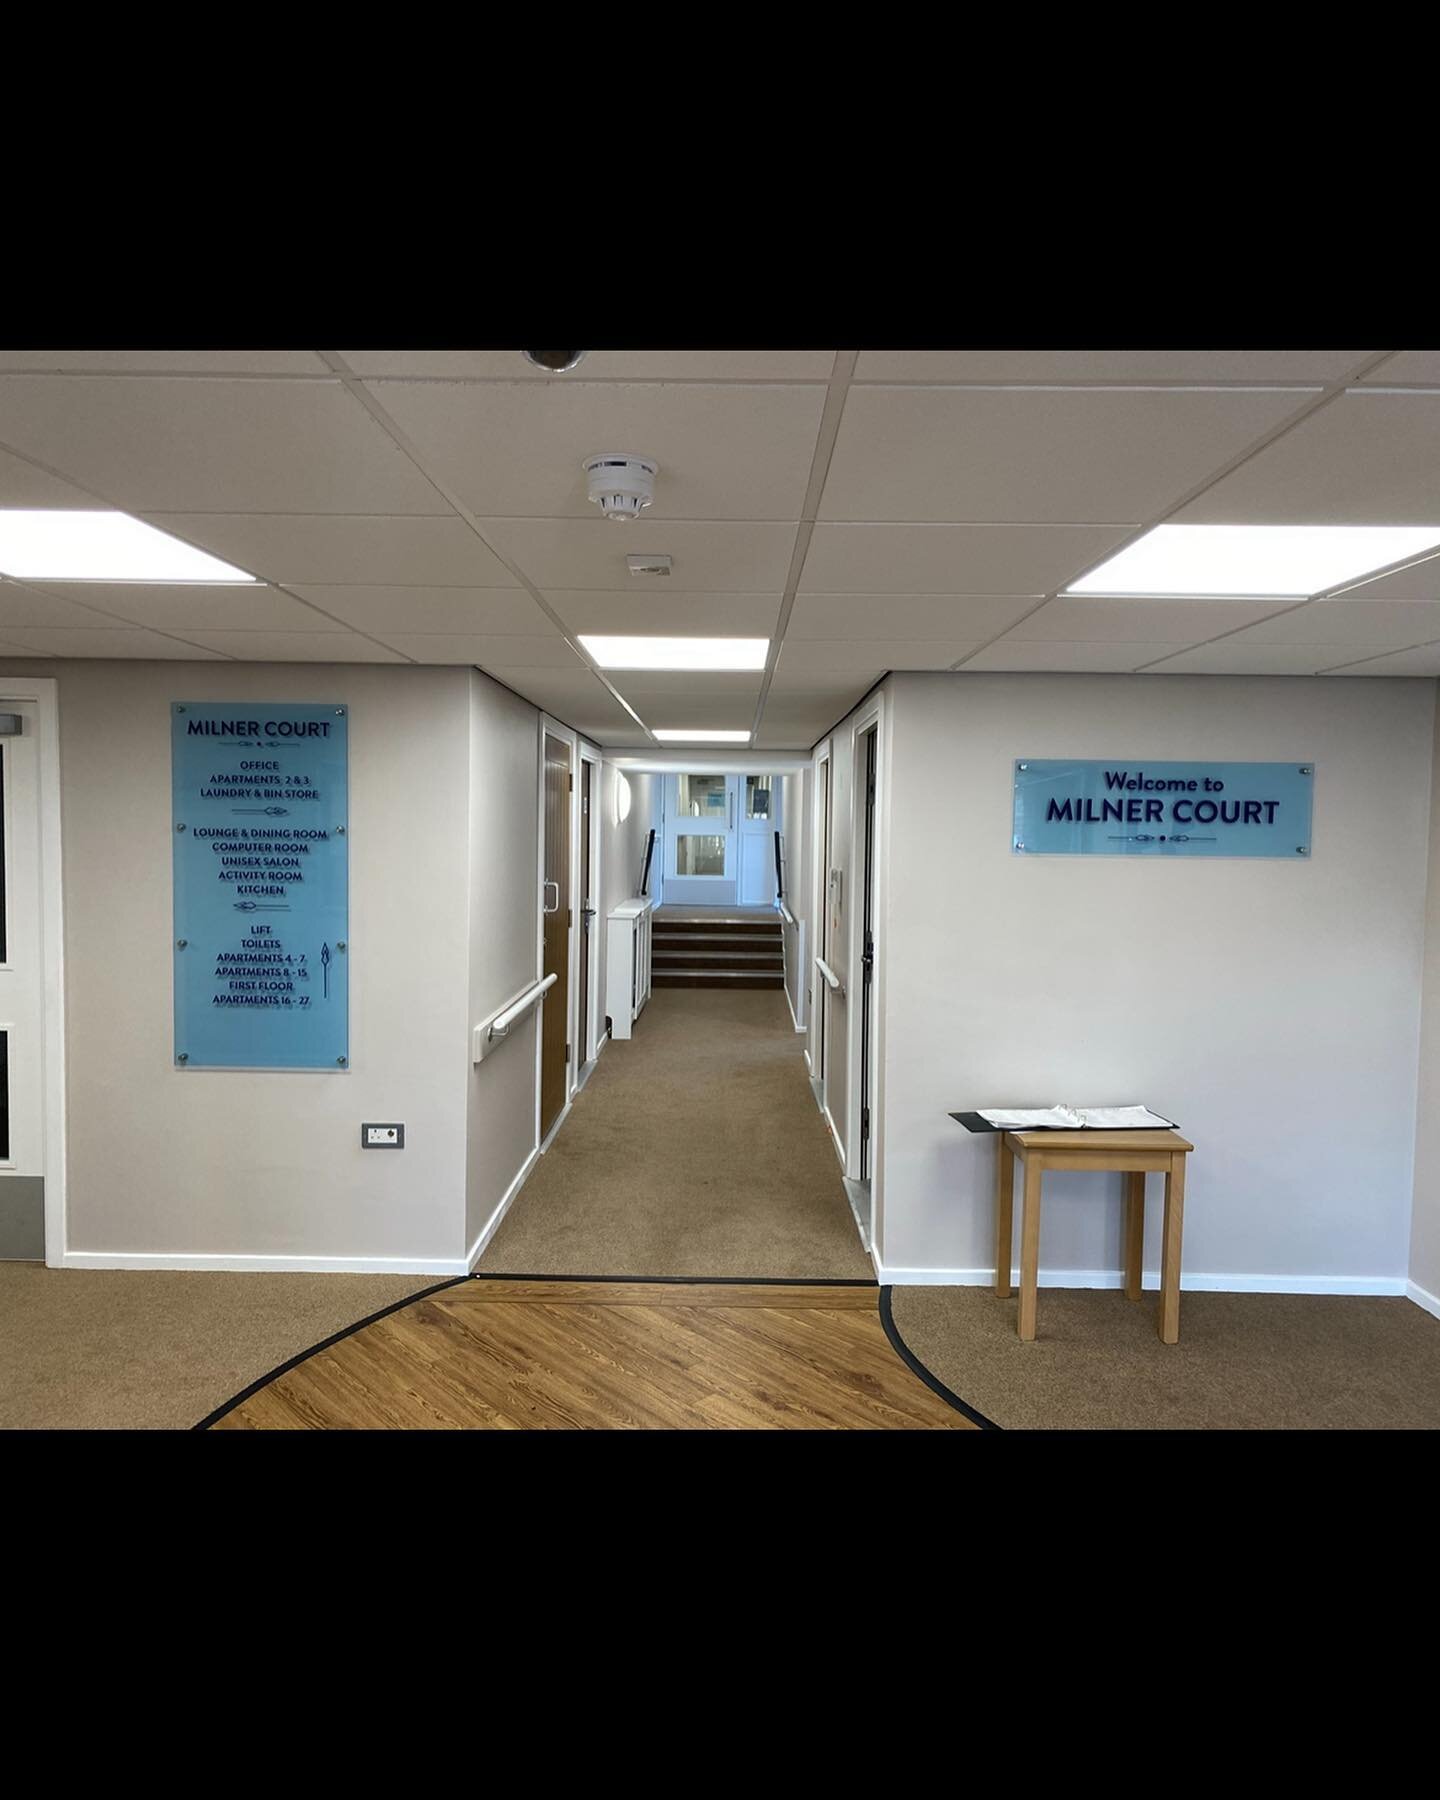 This project is at a lovely Care Home in Luton.  We actually commenced this work before the Covid outbreak but had to delay completion for the safety of the residents.  We are pleased to say that we have now been able to safely finish the project and